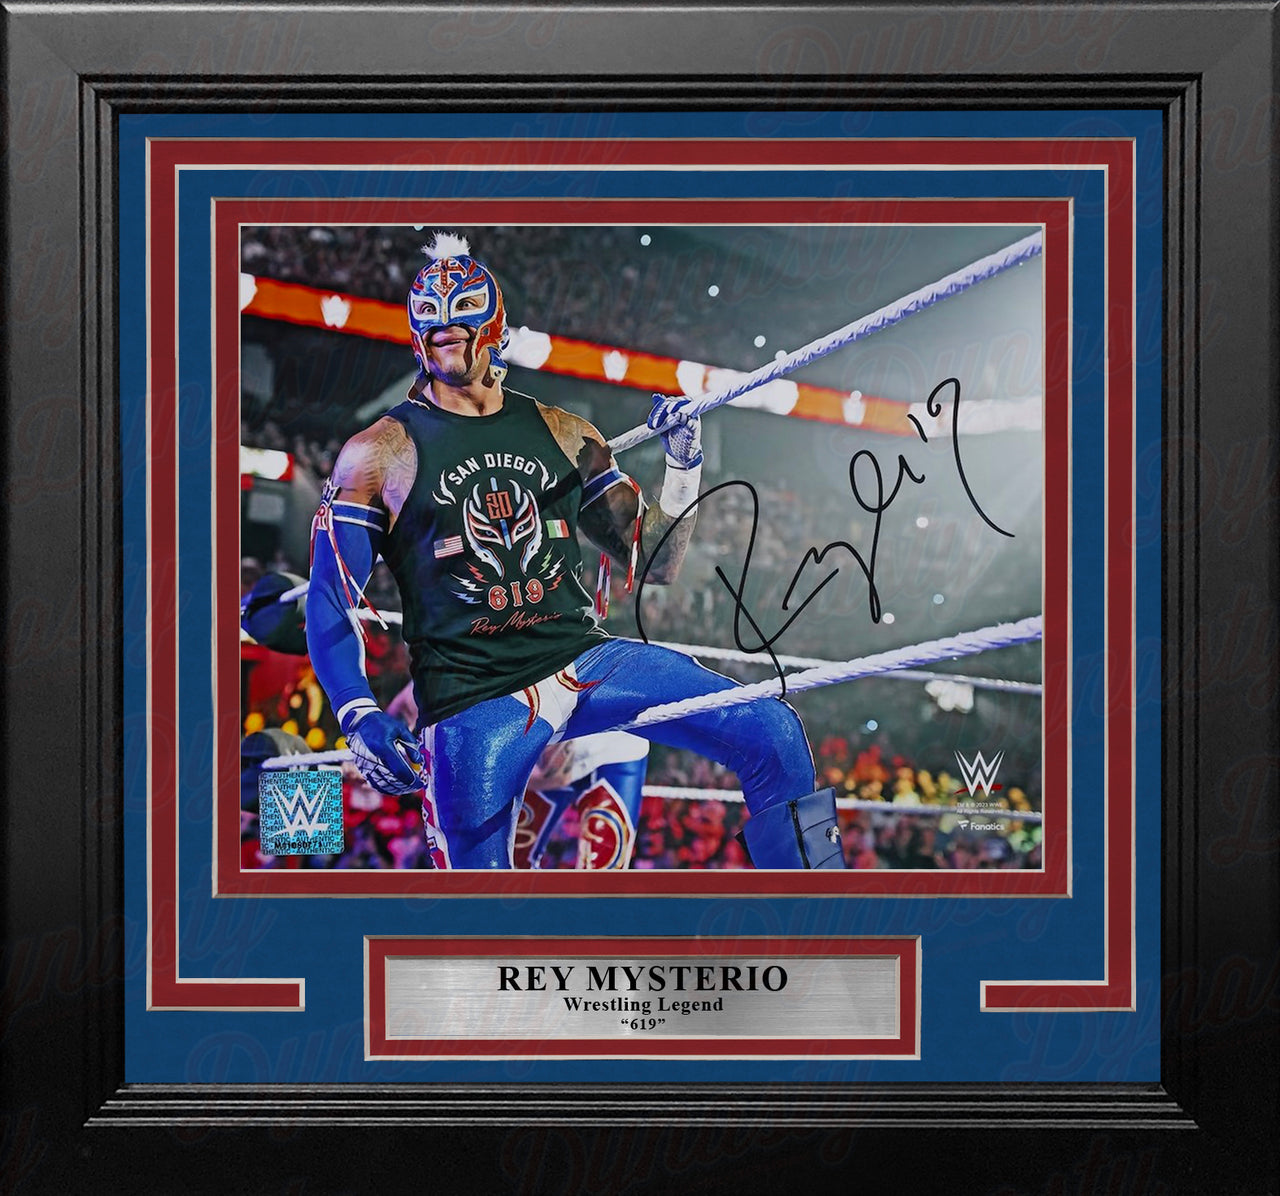 Rey Mysterio Enters the Ring Autographed Framed 8" x 10" WWE Wrestling Photo